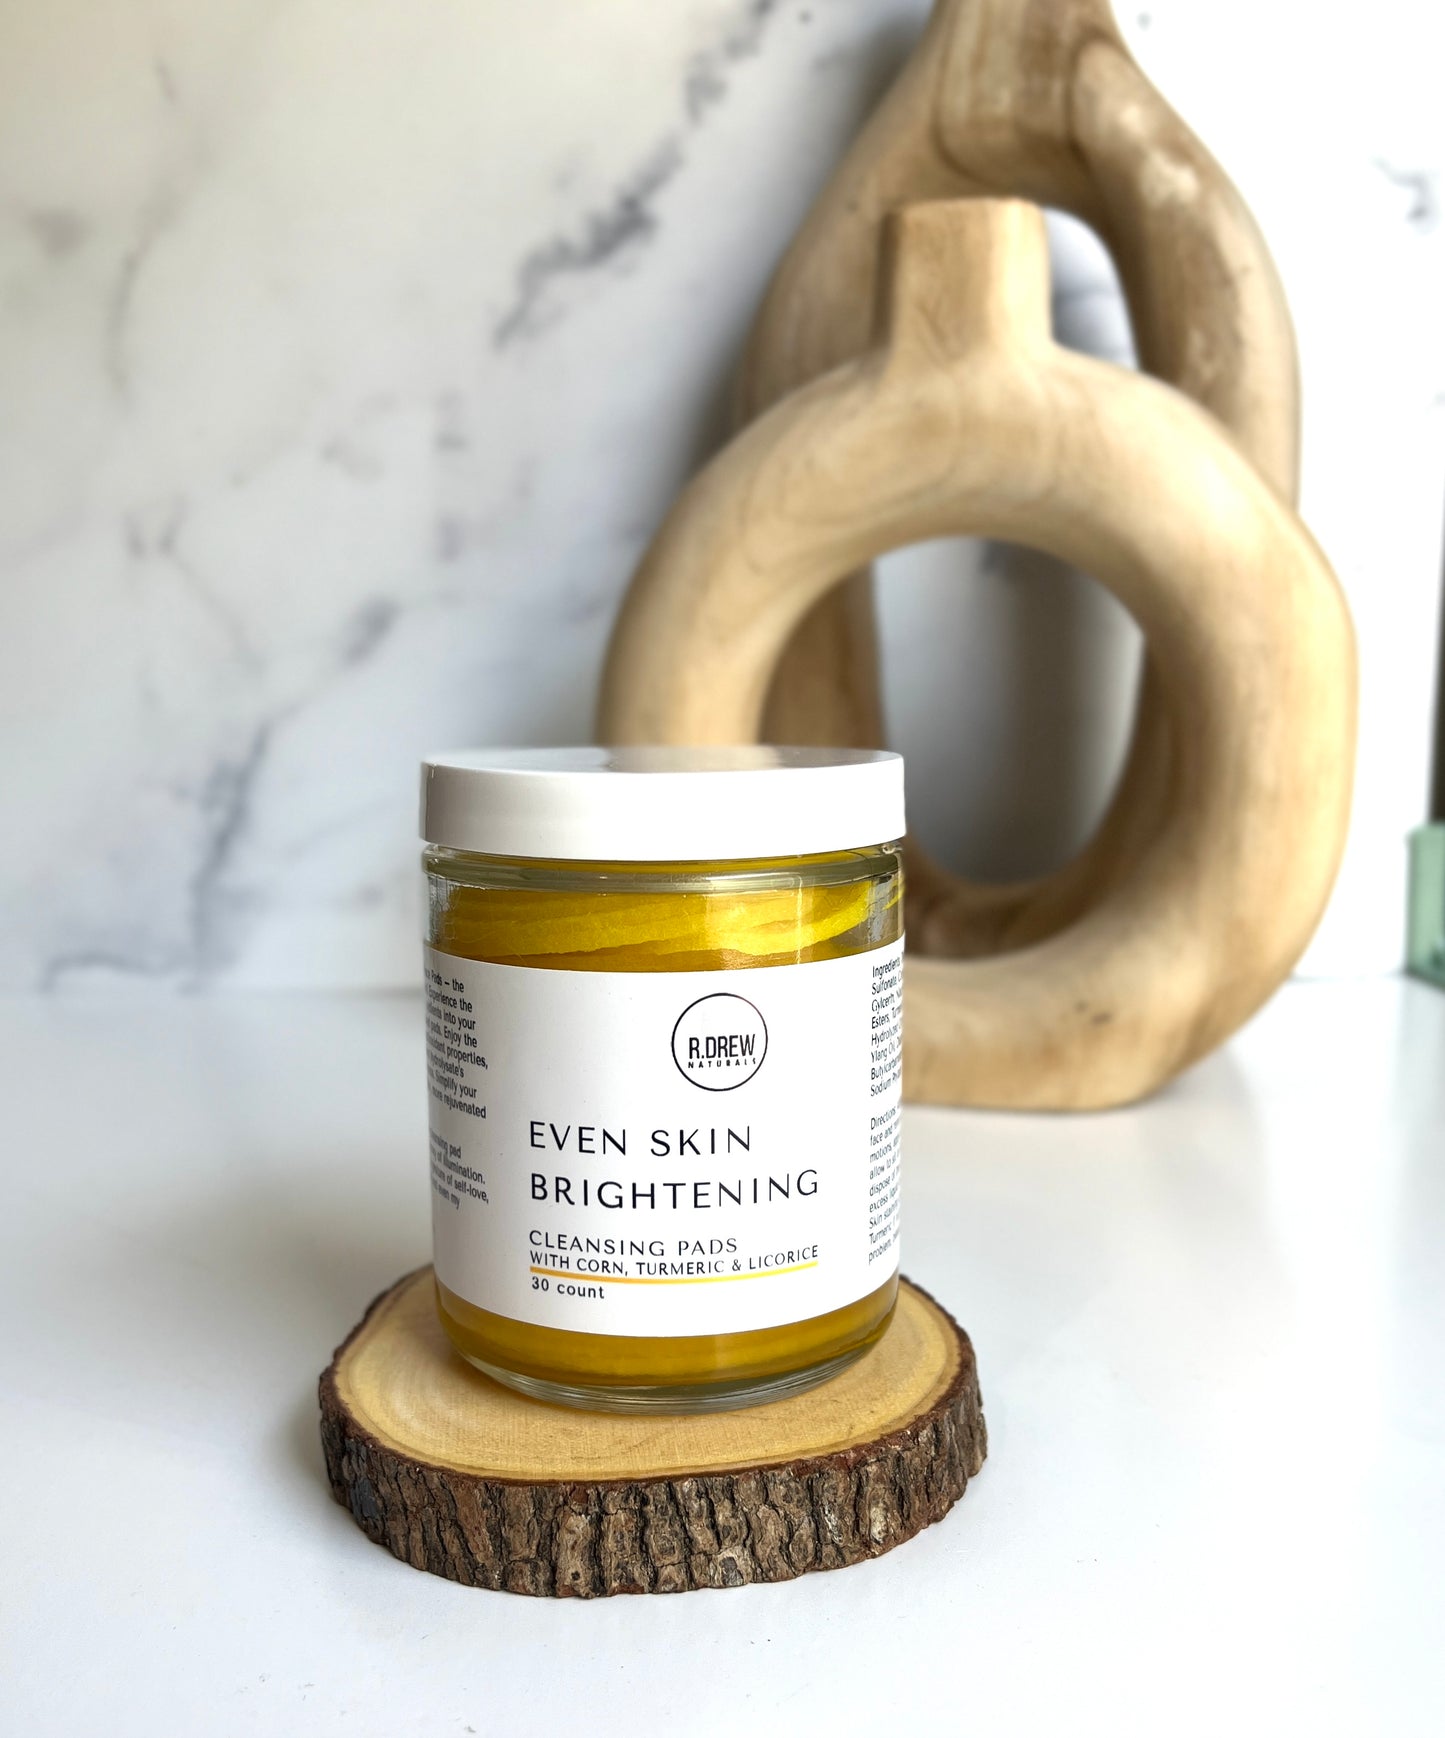 Even Skin Cleansing Pads with Turmeric, Licorice & Corn